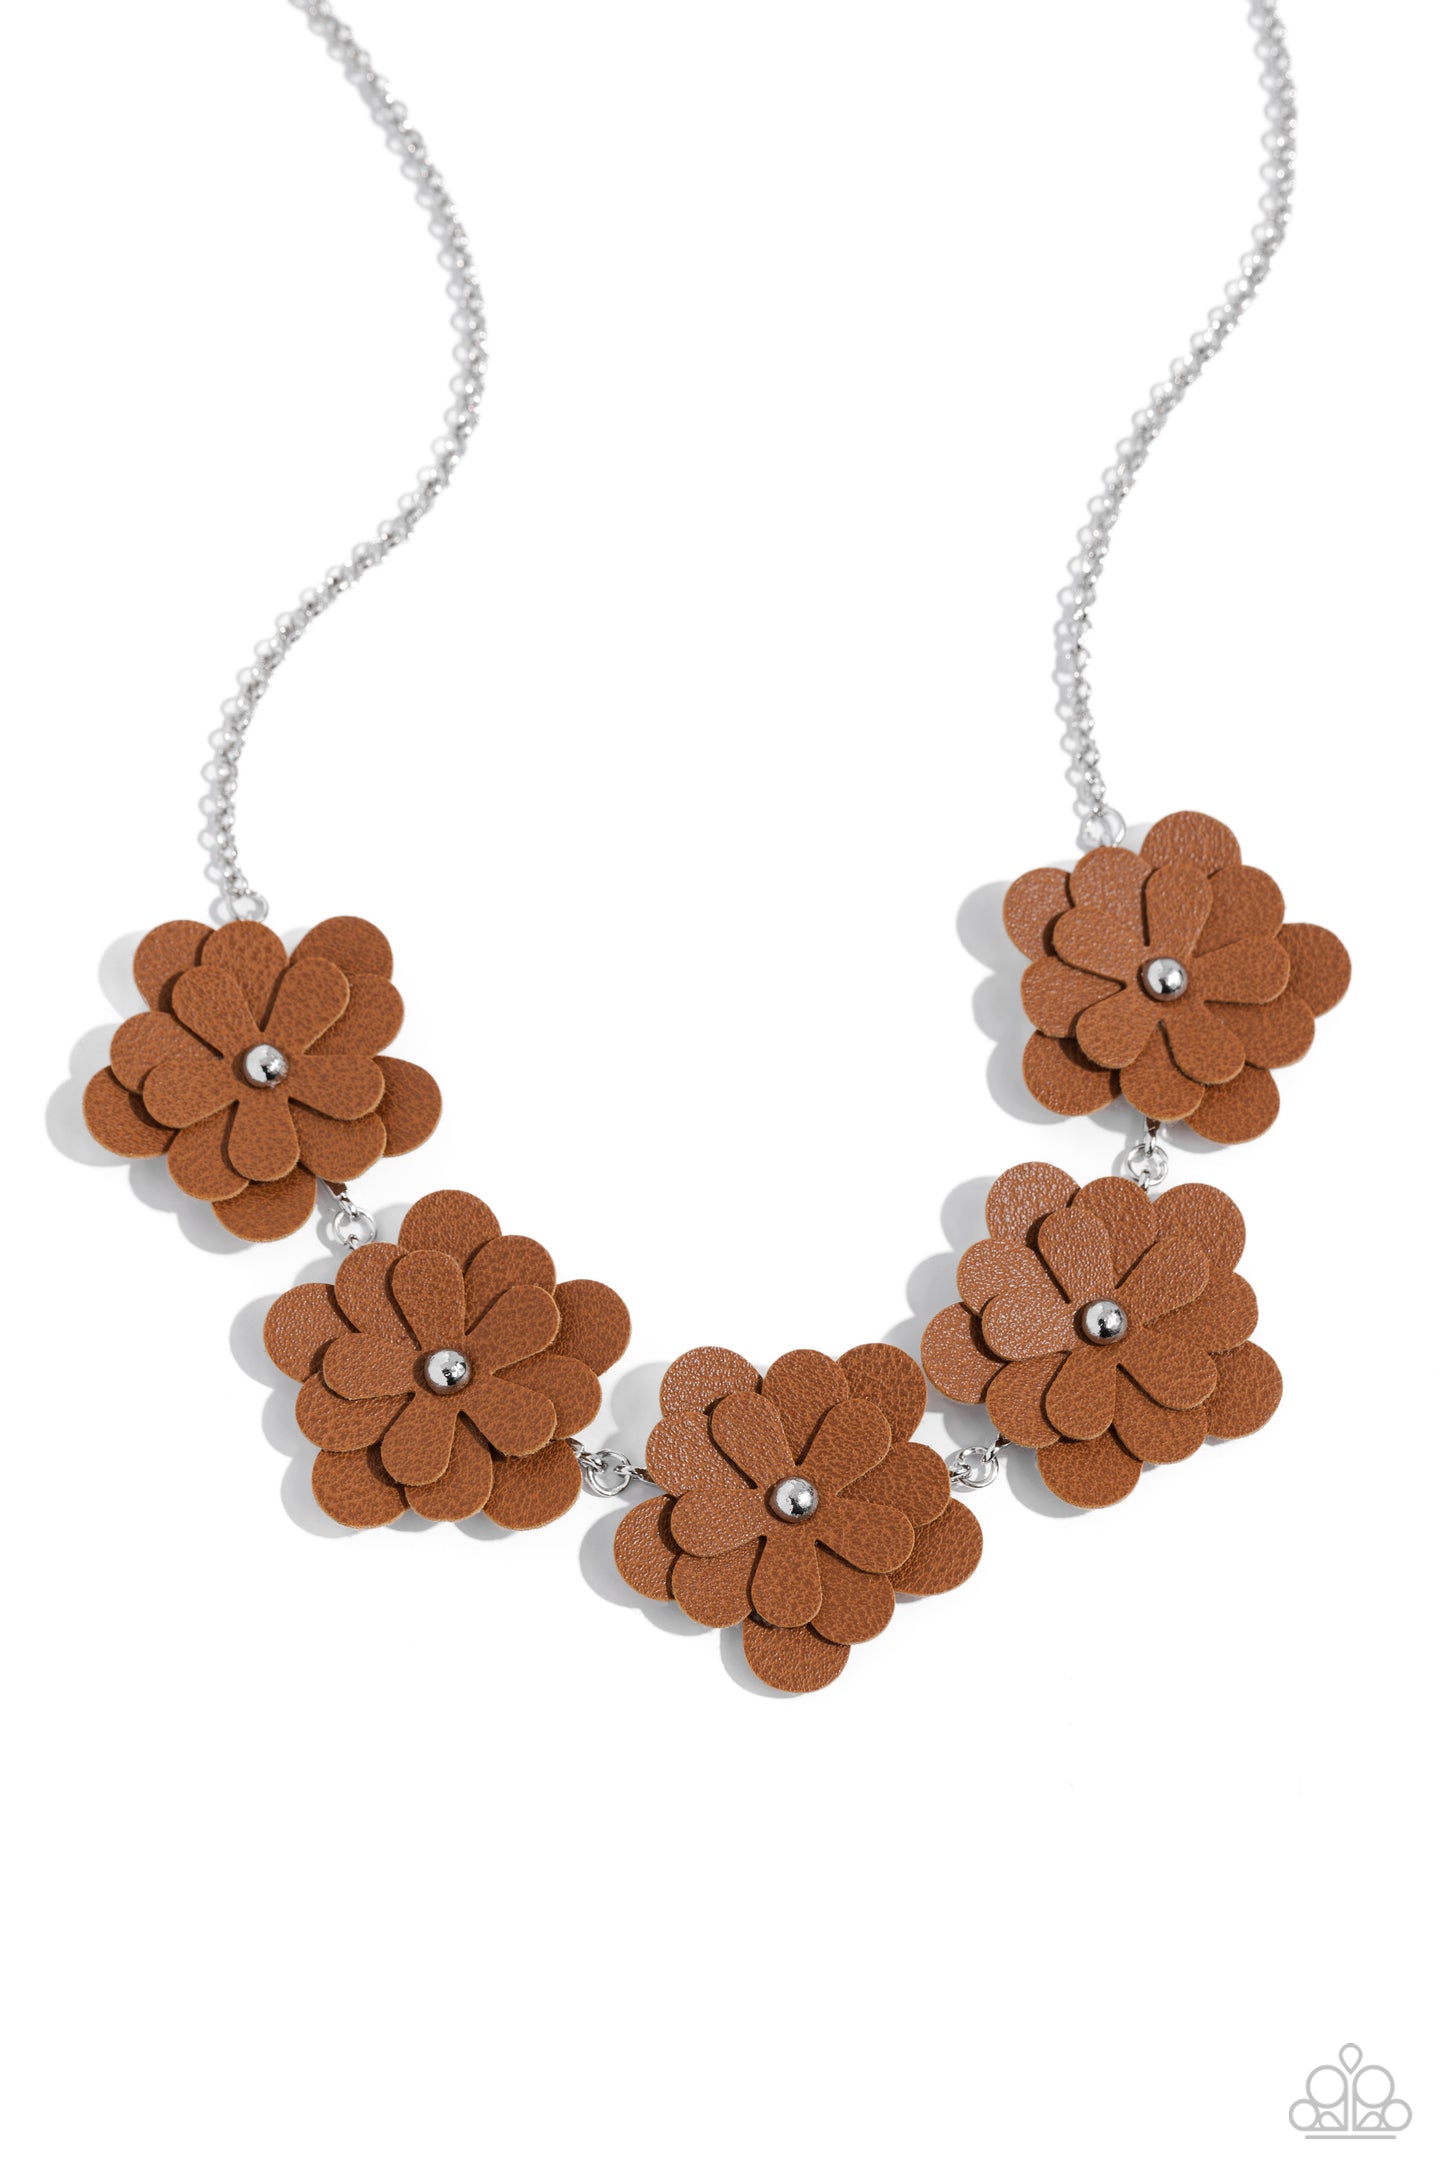 Balance of FLOWER - brown - Paparazzi necklace